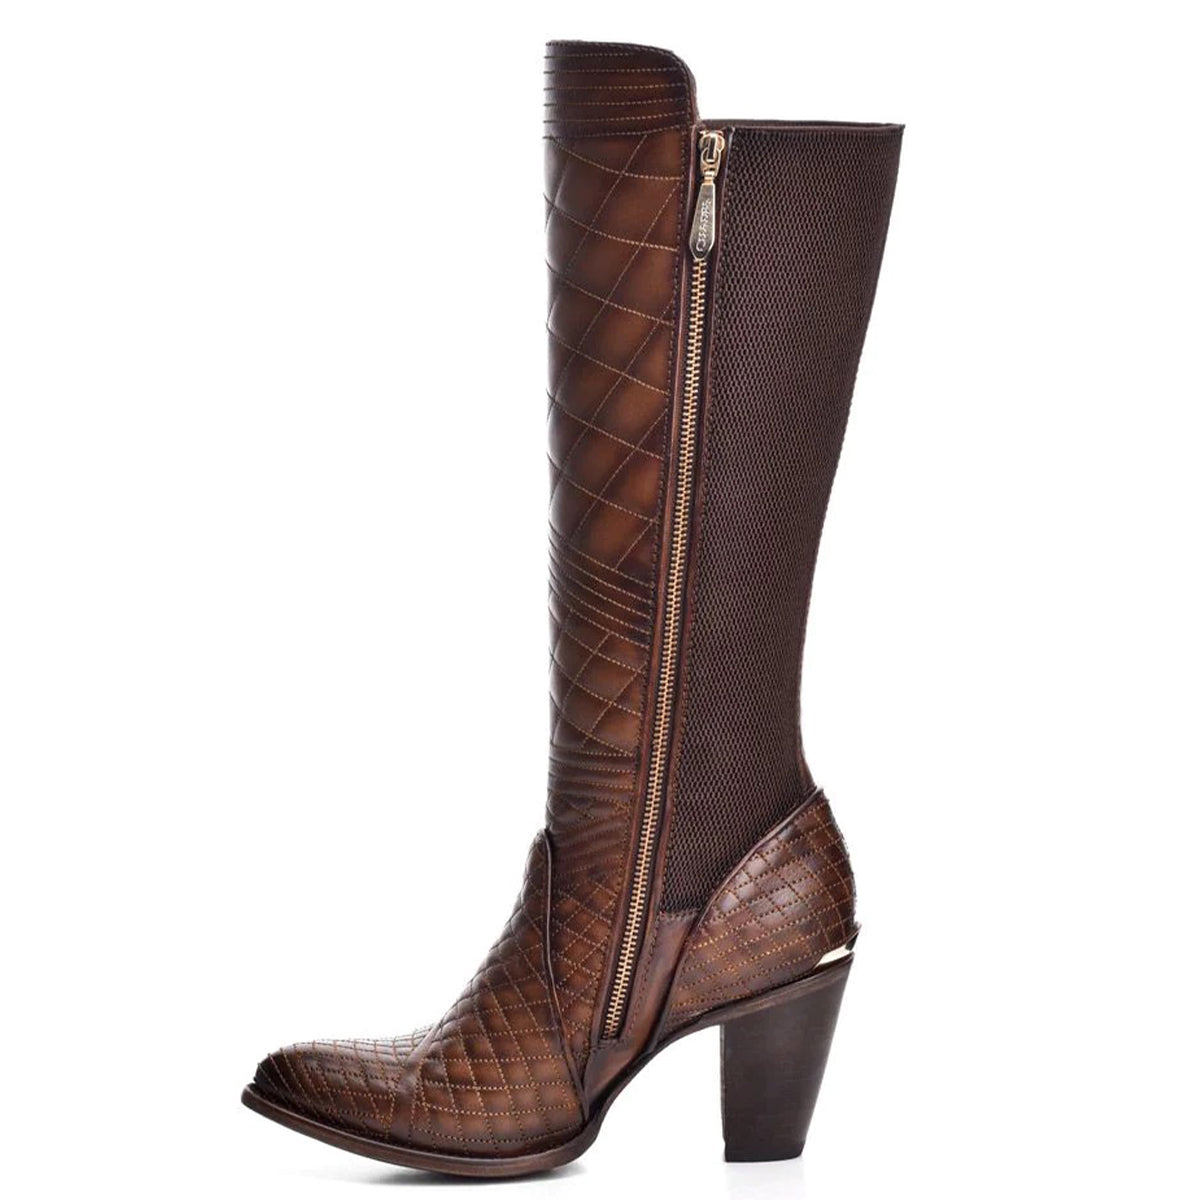 Cuadra Tall Boots For Women inner view